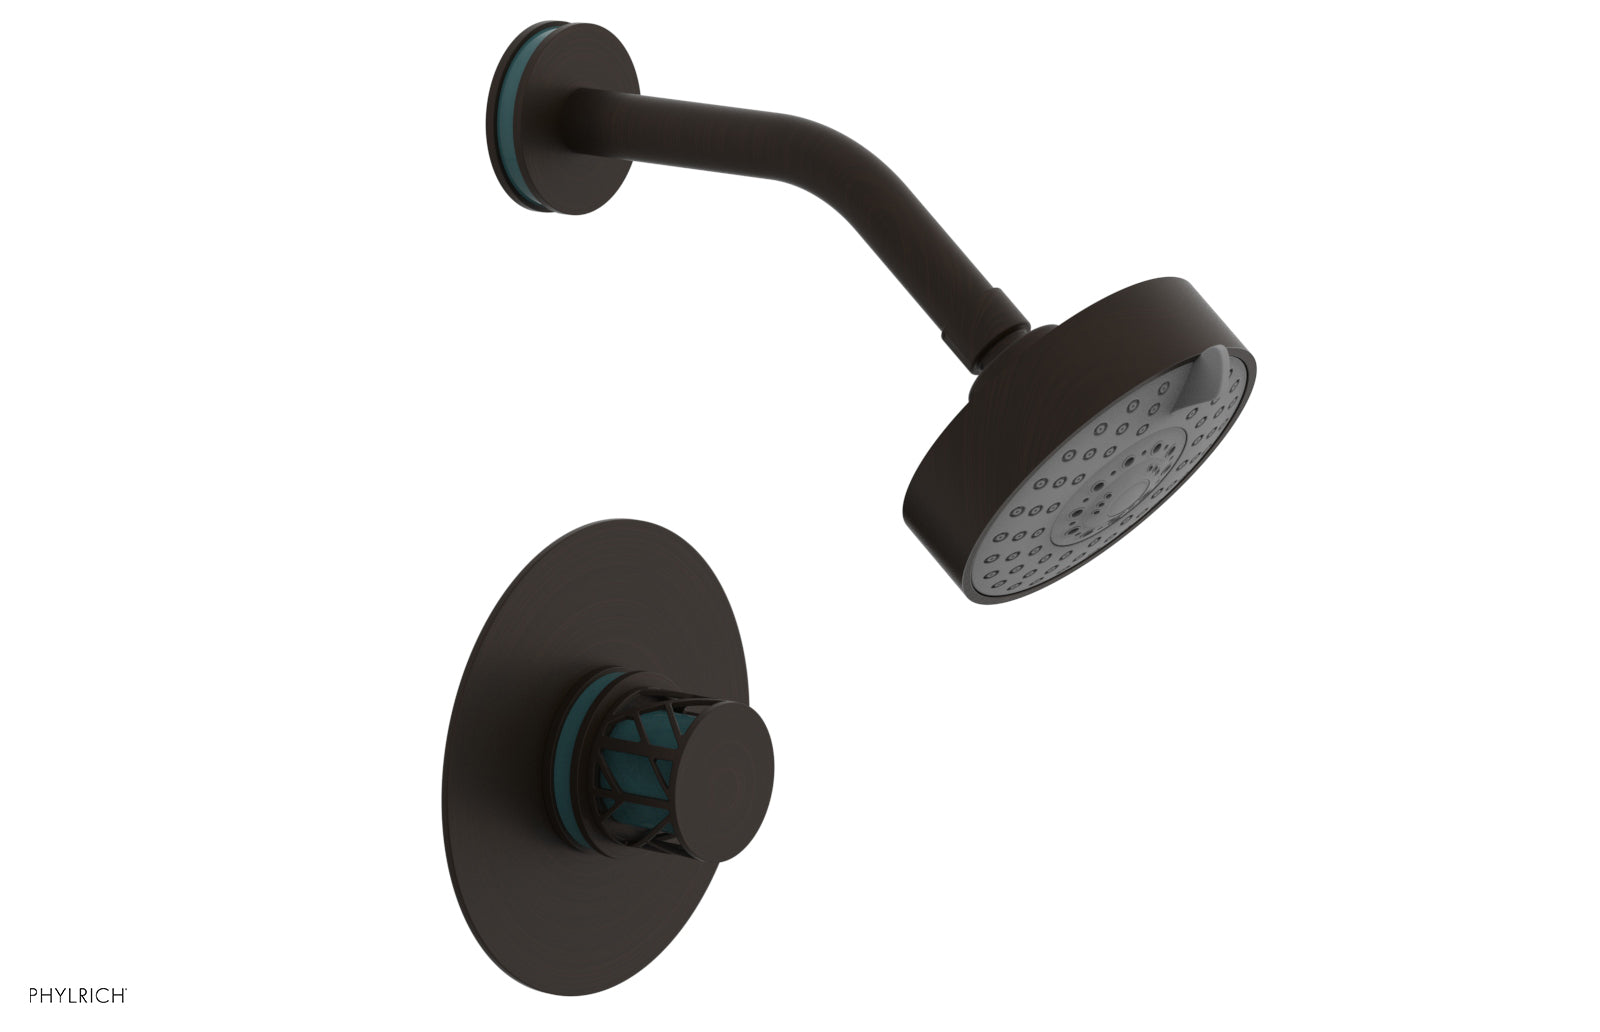 Phylrich JOLIE Pressure Balance Shower Set - Round Handle with "Turquoise" Accents